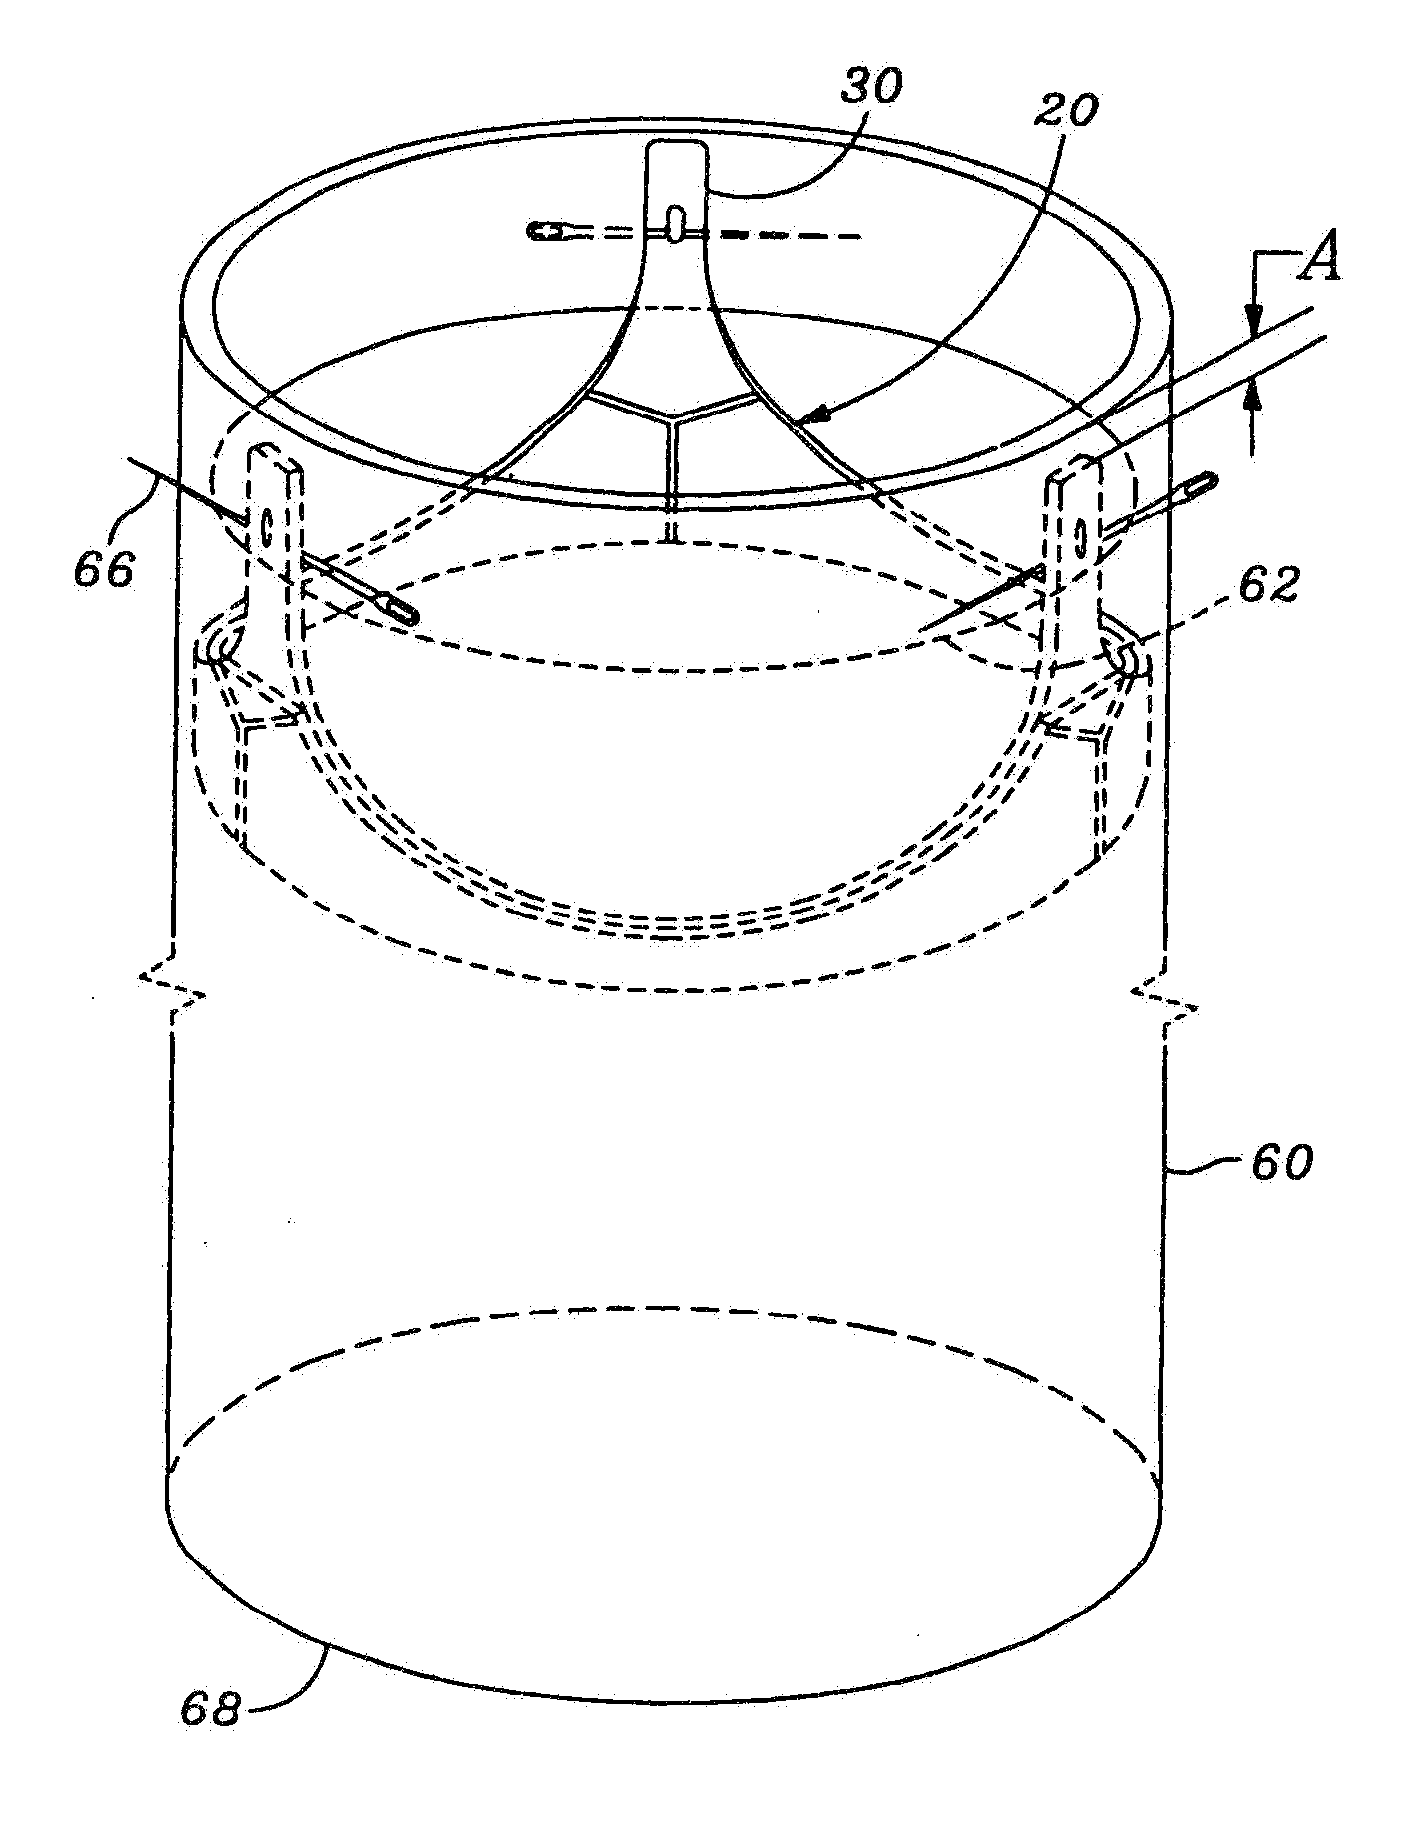 Methods of implant of a heart valve with a convertible sewing ring